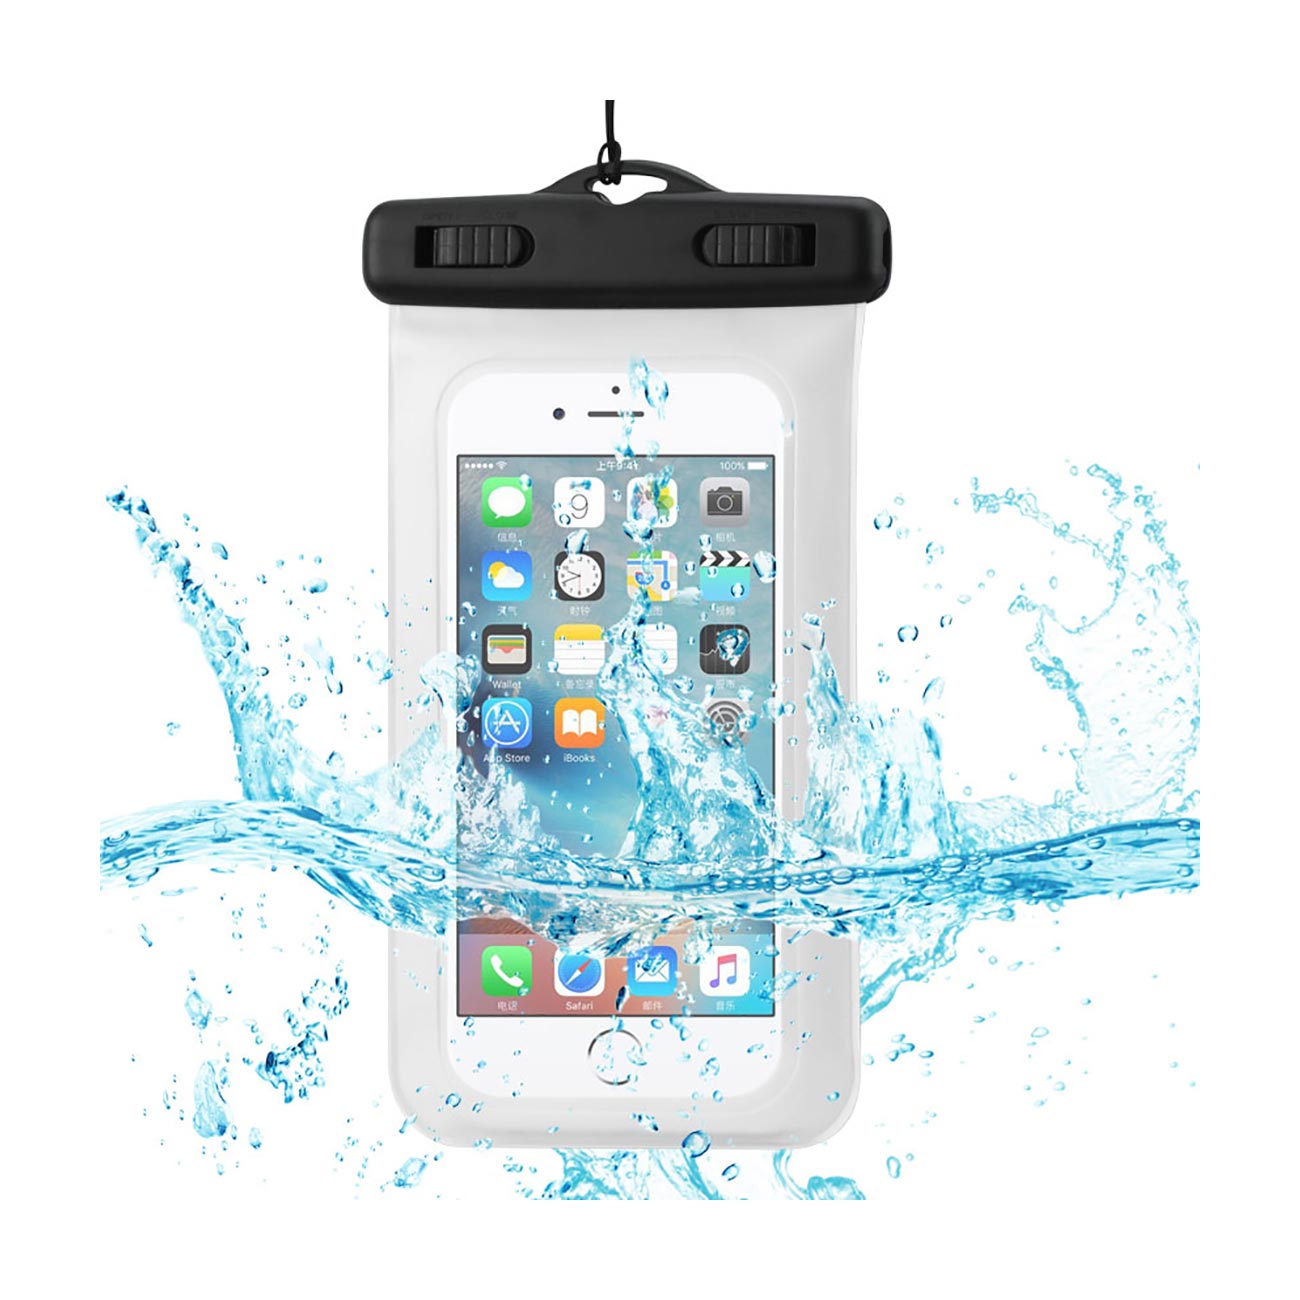 Case Waterproof With Touch Screen Floating Adjustable Wrist Strap For 4.7X2.4X0.4 Inches Devices White Color